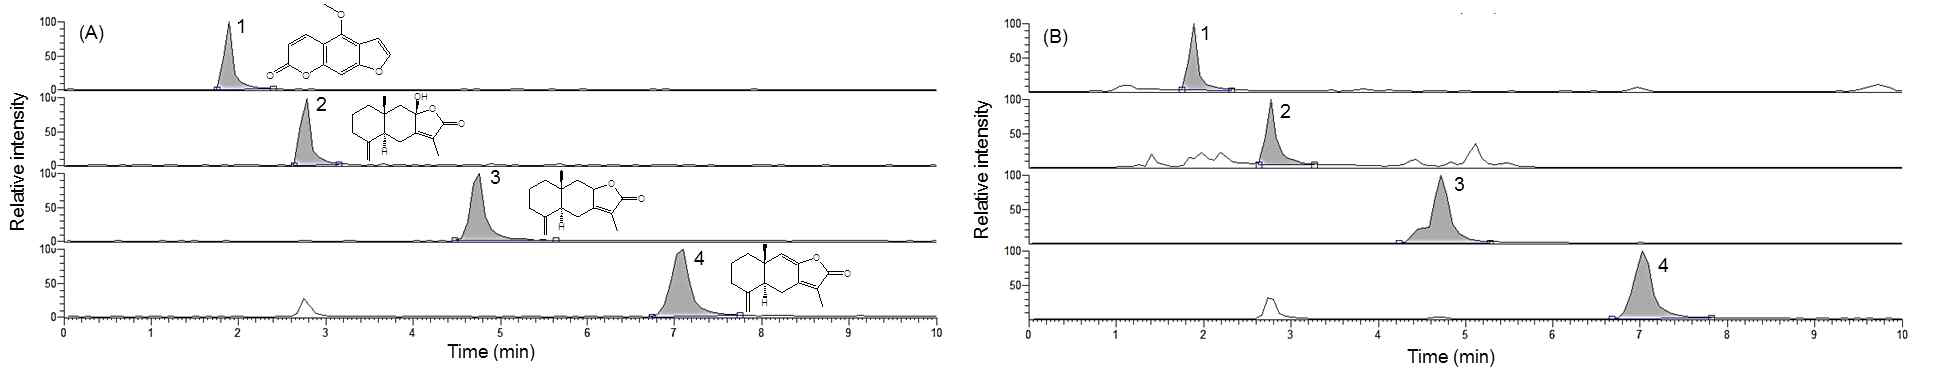 Extracted ion chromatogram of the three marker compounds and the IS in standard mixture (A) and the methanol extract of A. japonica samples (B) in the positive ion mode. 1, bergapten; 2, atractylenolide III; 3, atractylenolide II; and 4, atractylenolide I